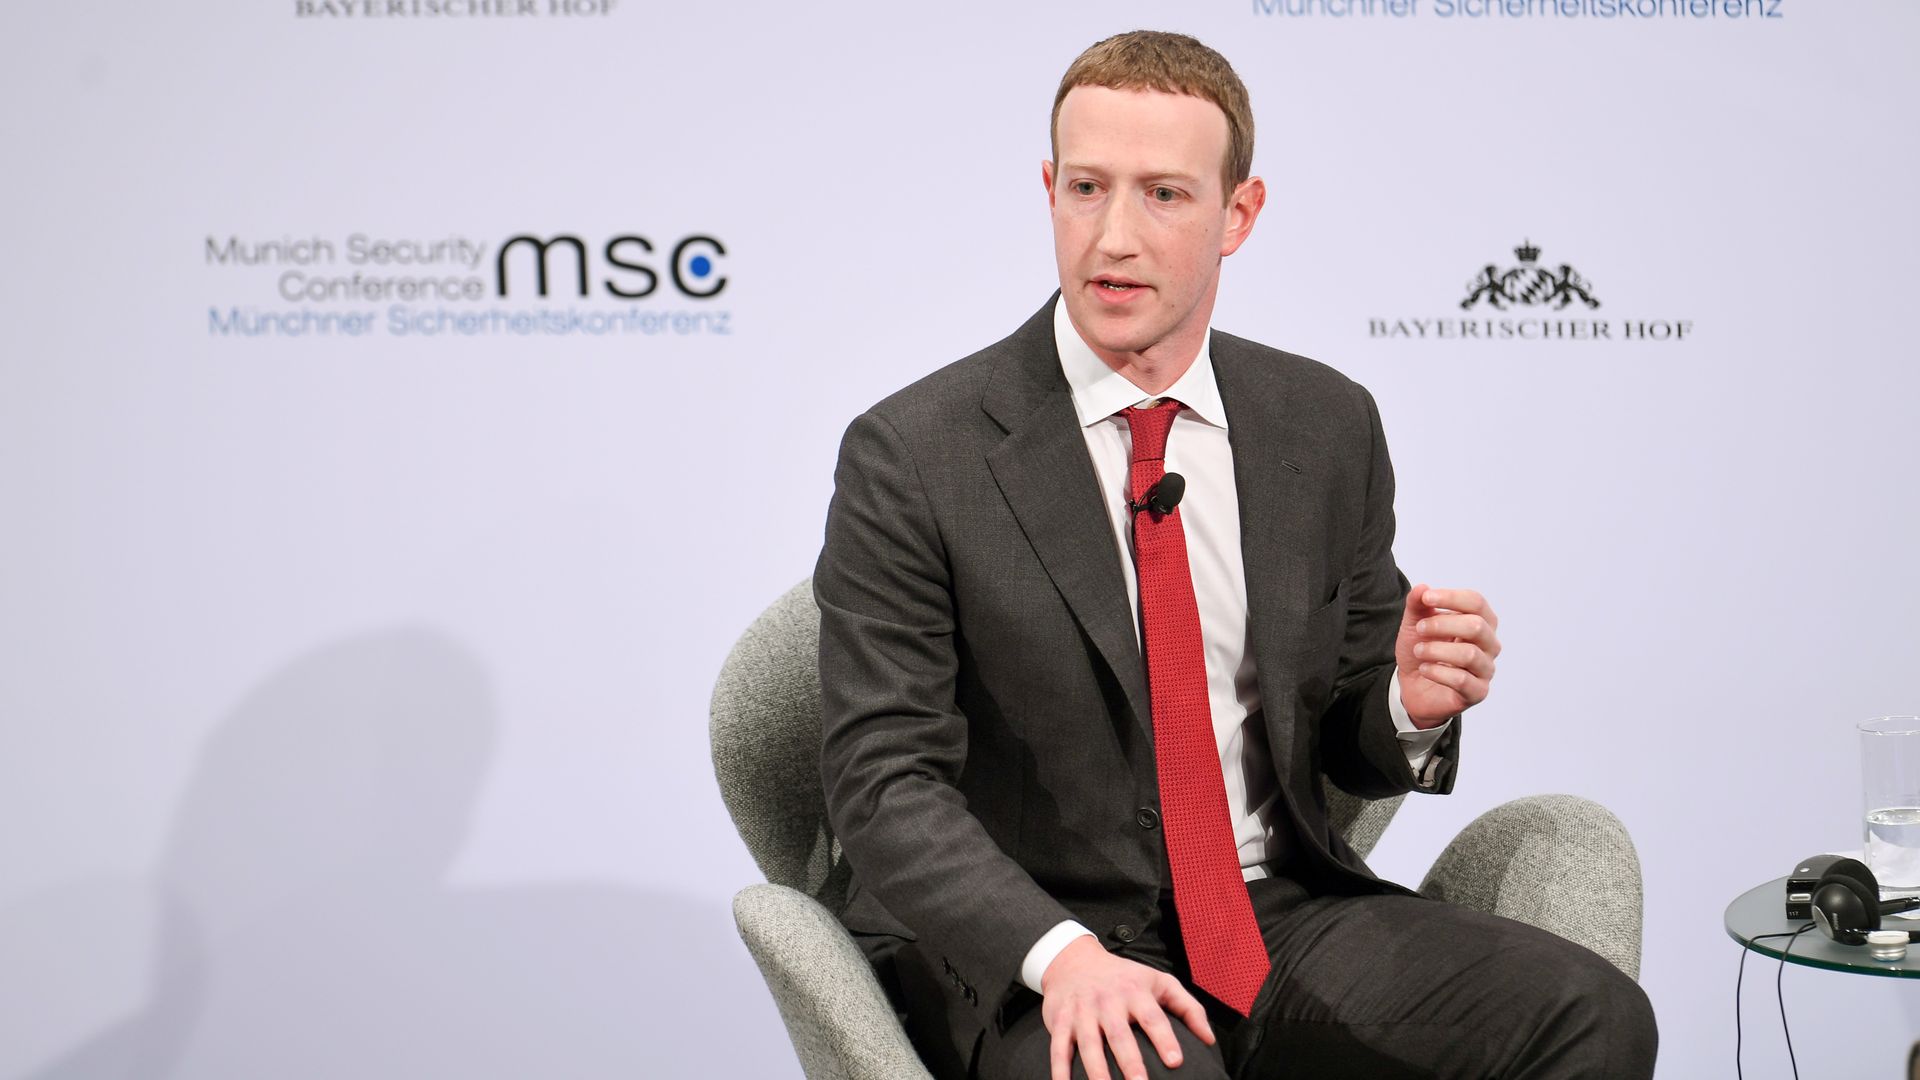 Facebook CEO Mark Zuckerberg speaking at an event during the Munich Conference